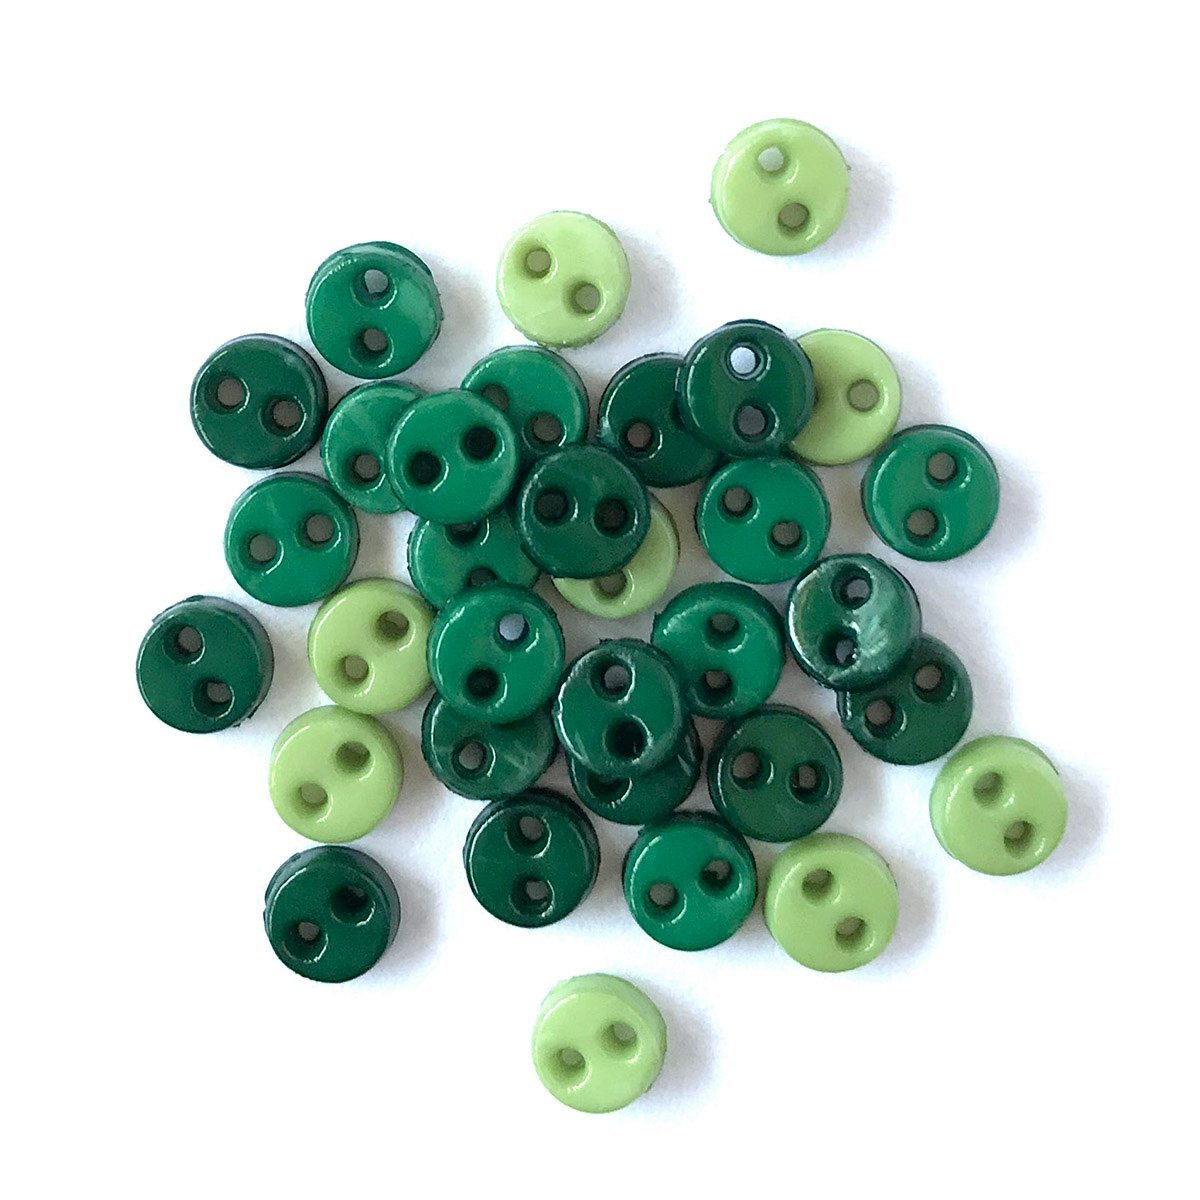 Rainforest Micro-1812 - Buttons Galore and More